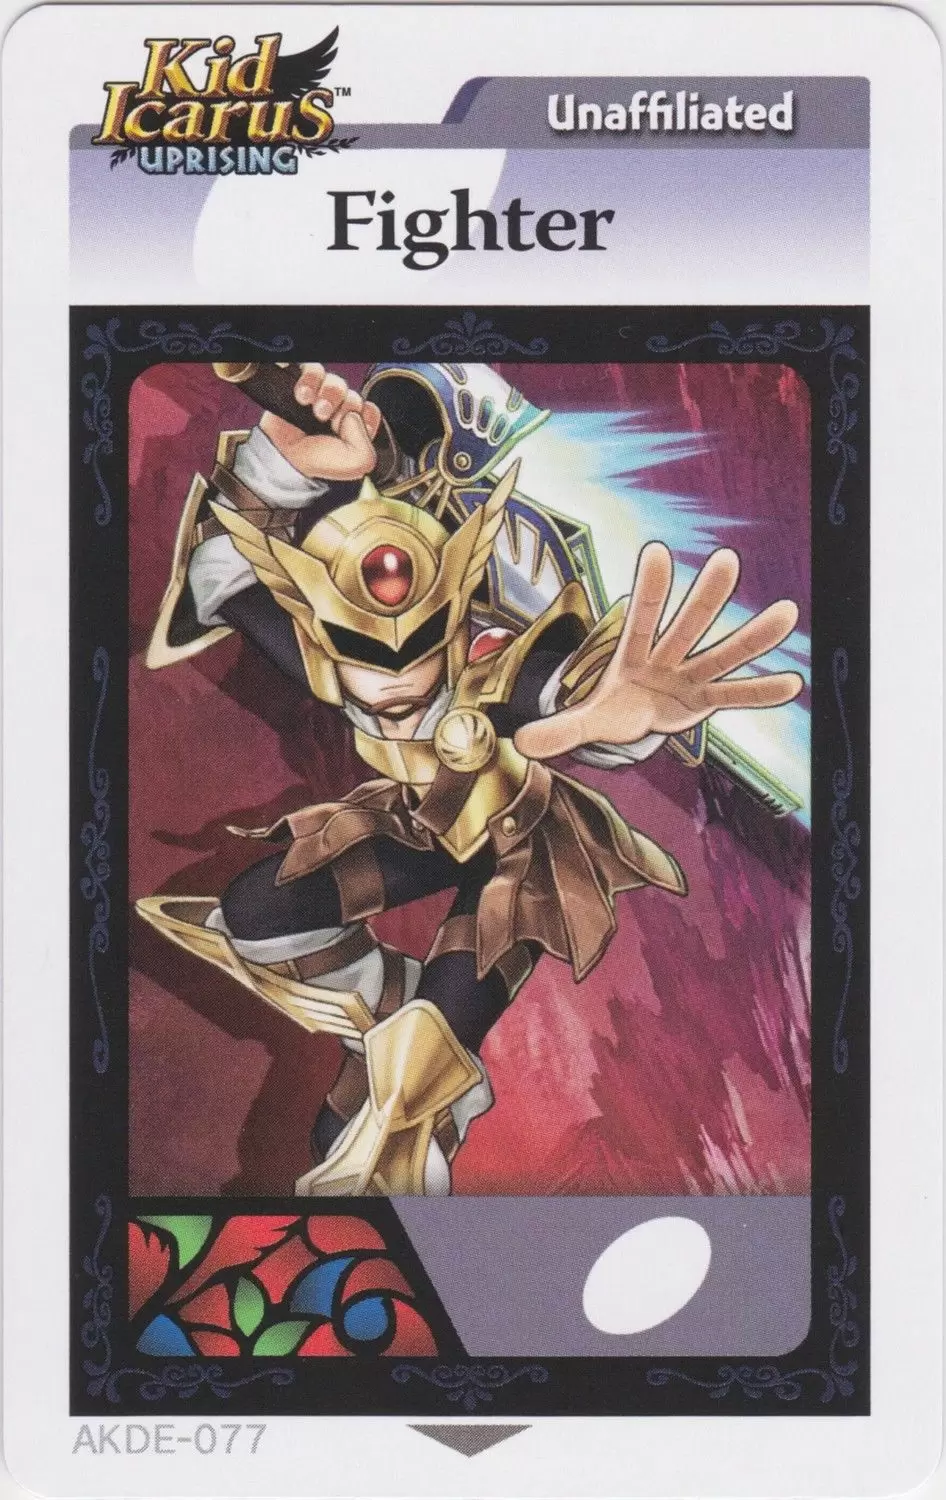 Kid Icarus Uprising AR cards - Fighter